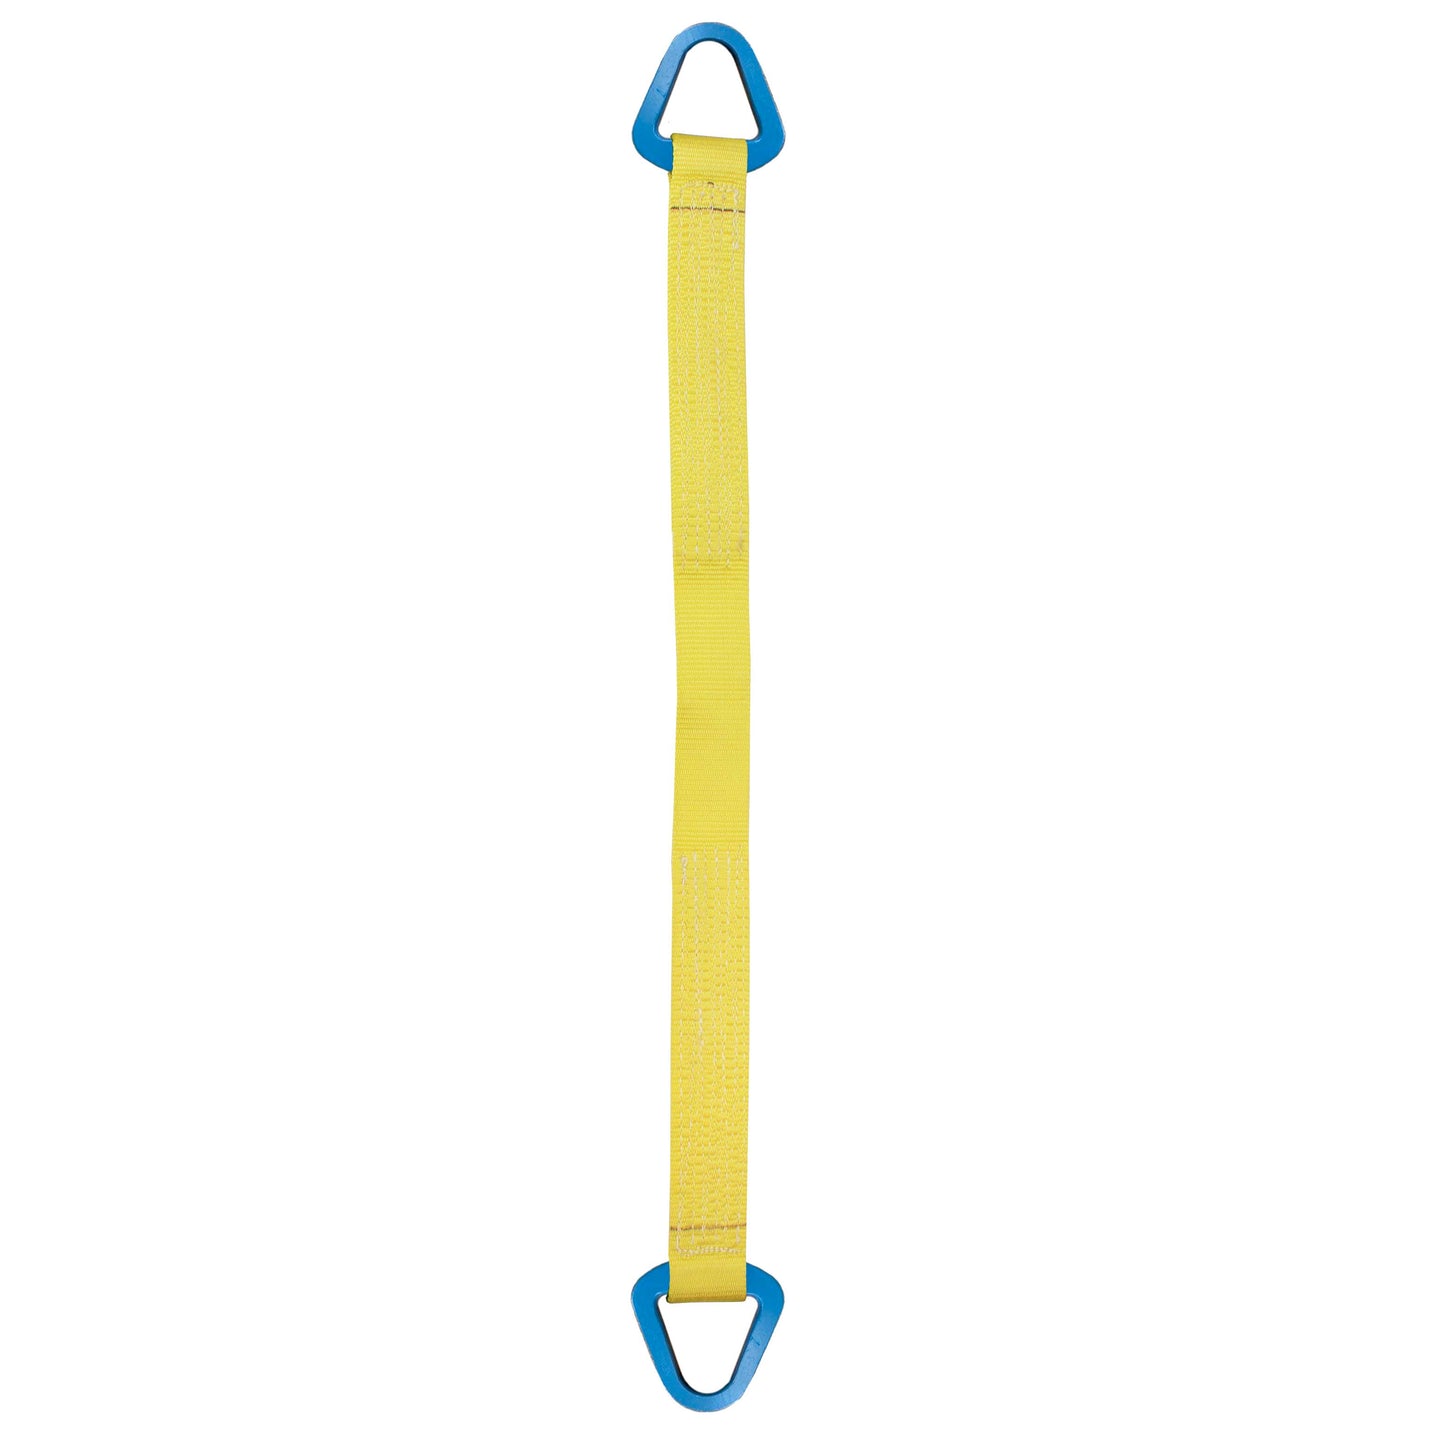 Nylon Lifting Sling Triangle 12 inch x 6 foot 2ply image 1 of 2